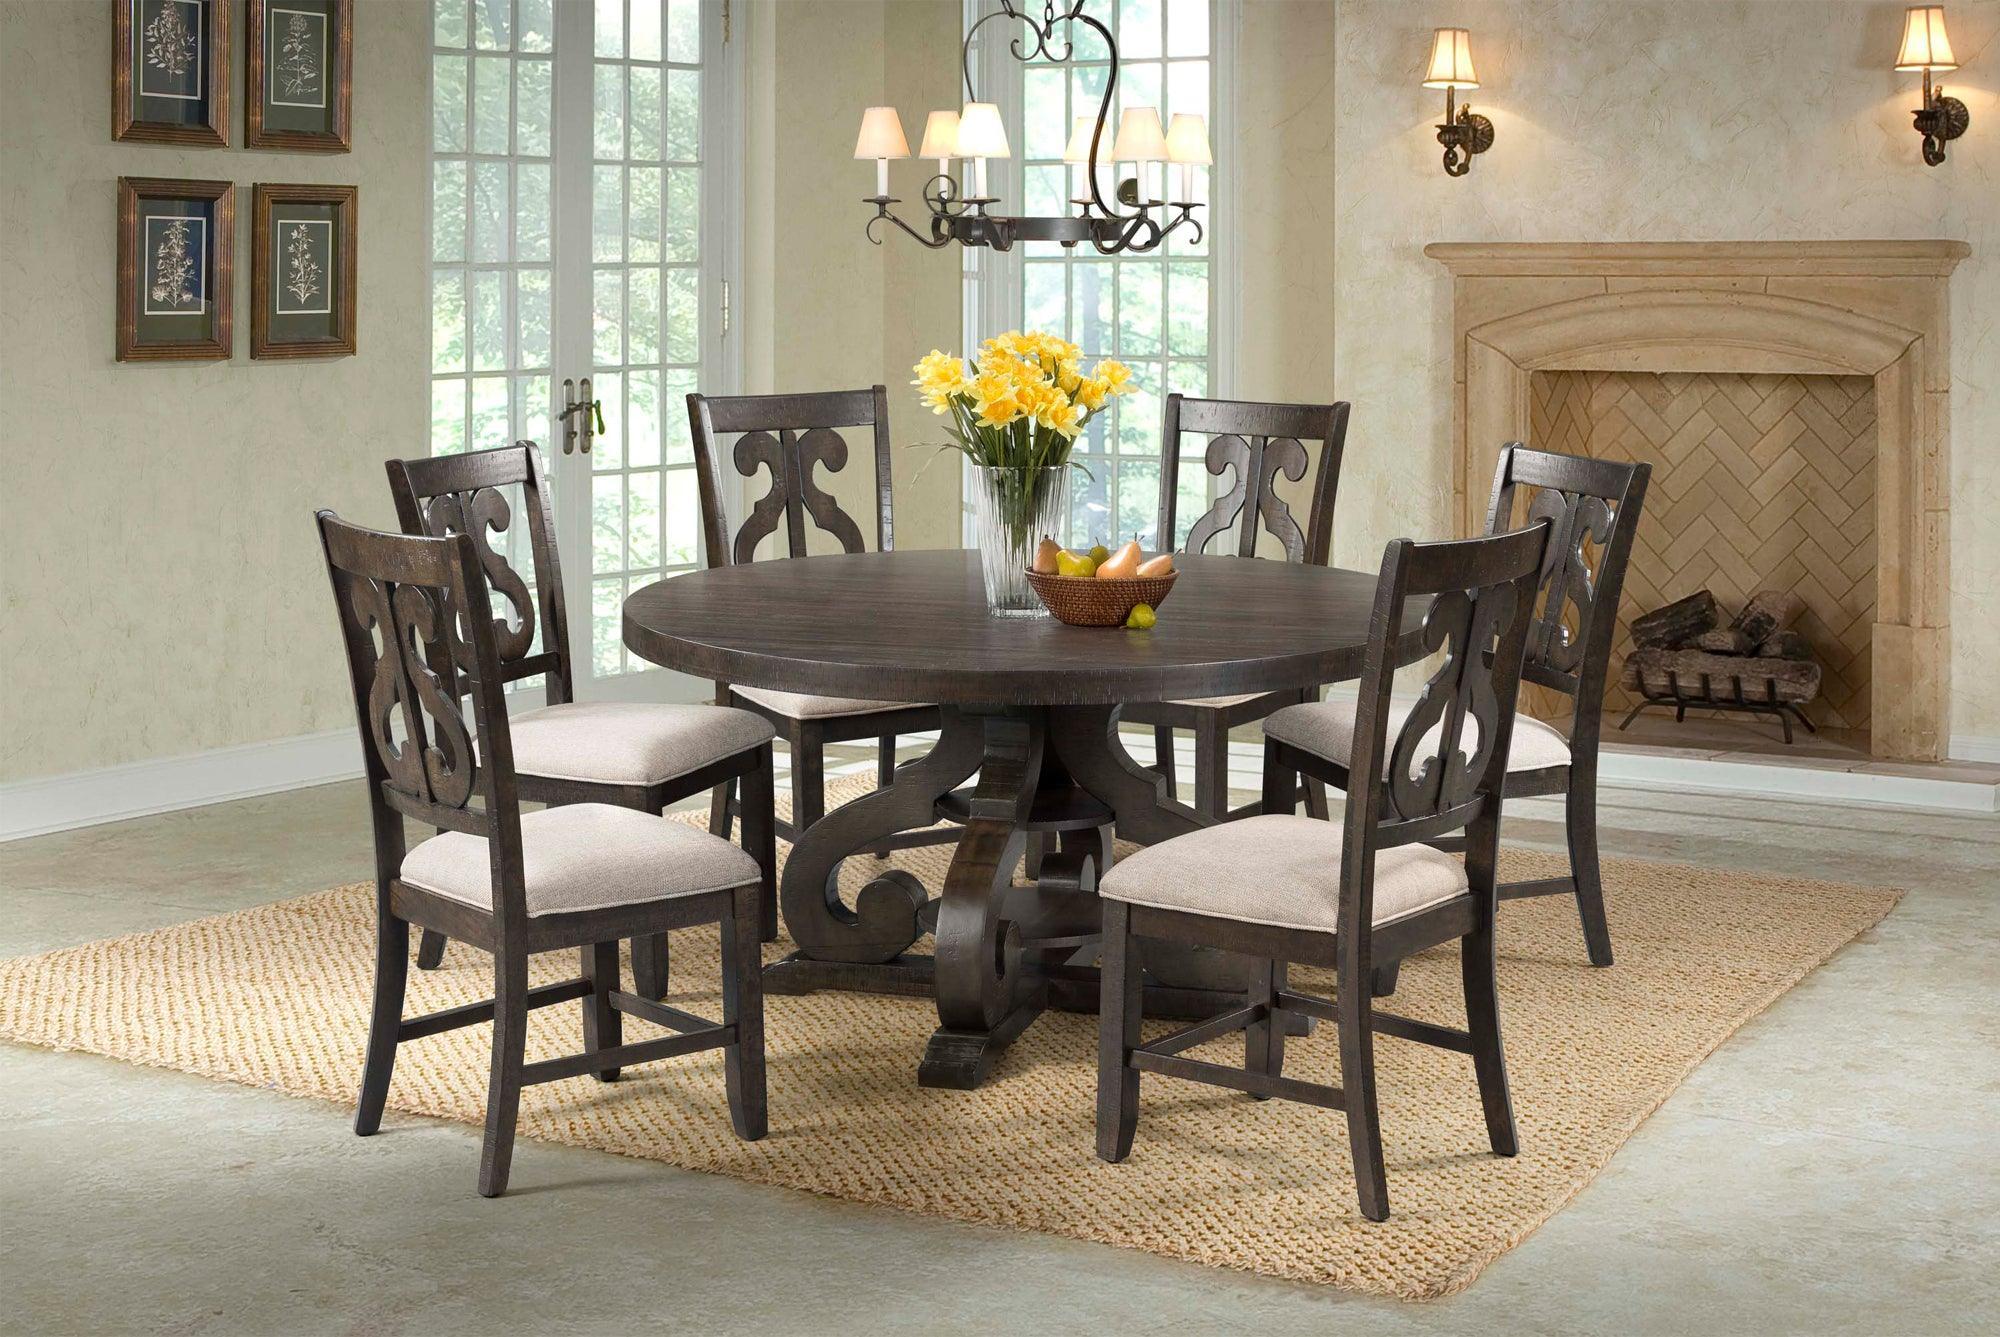 Elements Dining Sets - Stanford Round 7PC Dining Set-Round Table & 6 Chairs